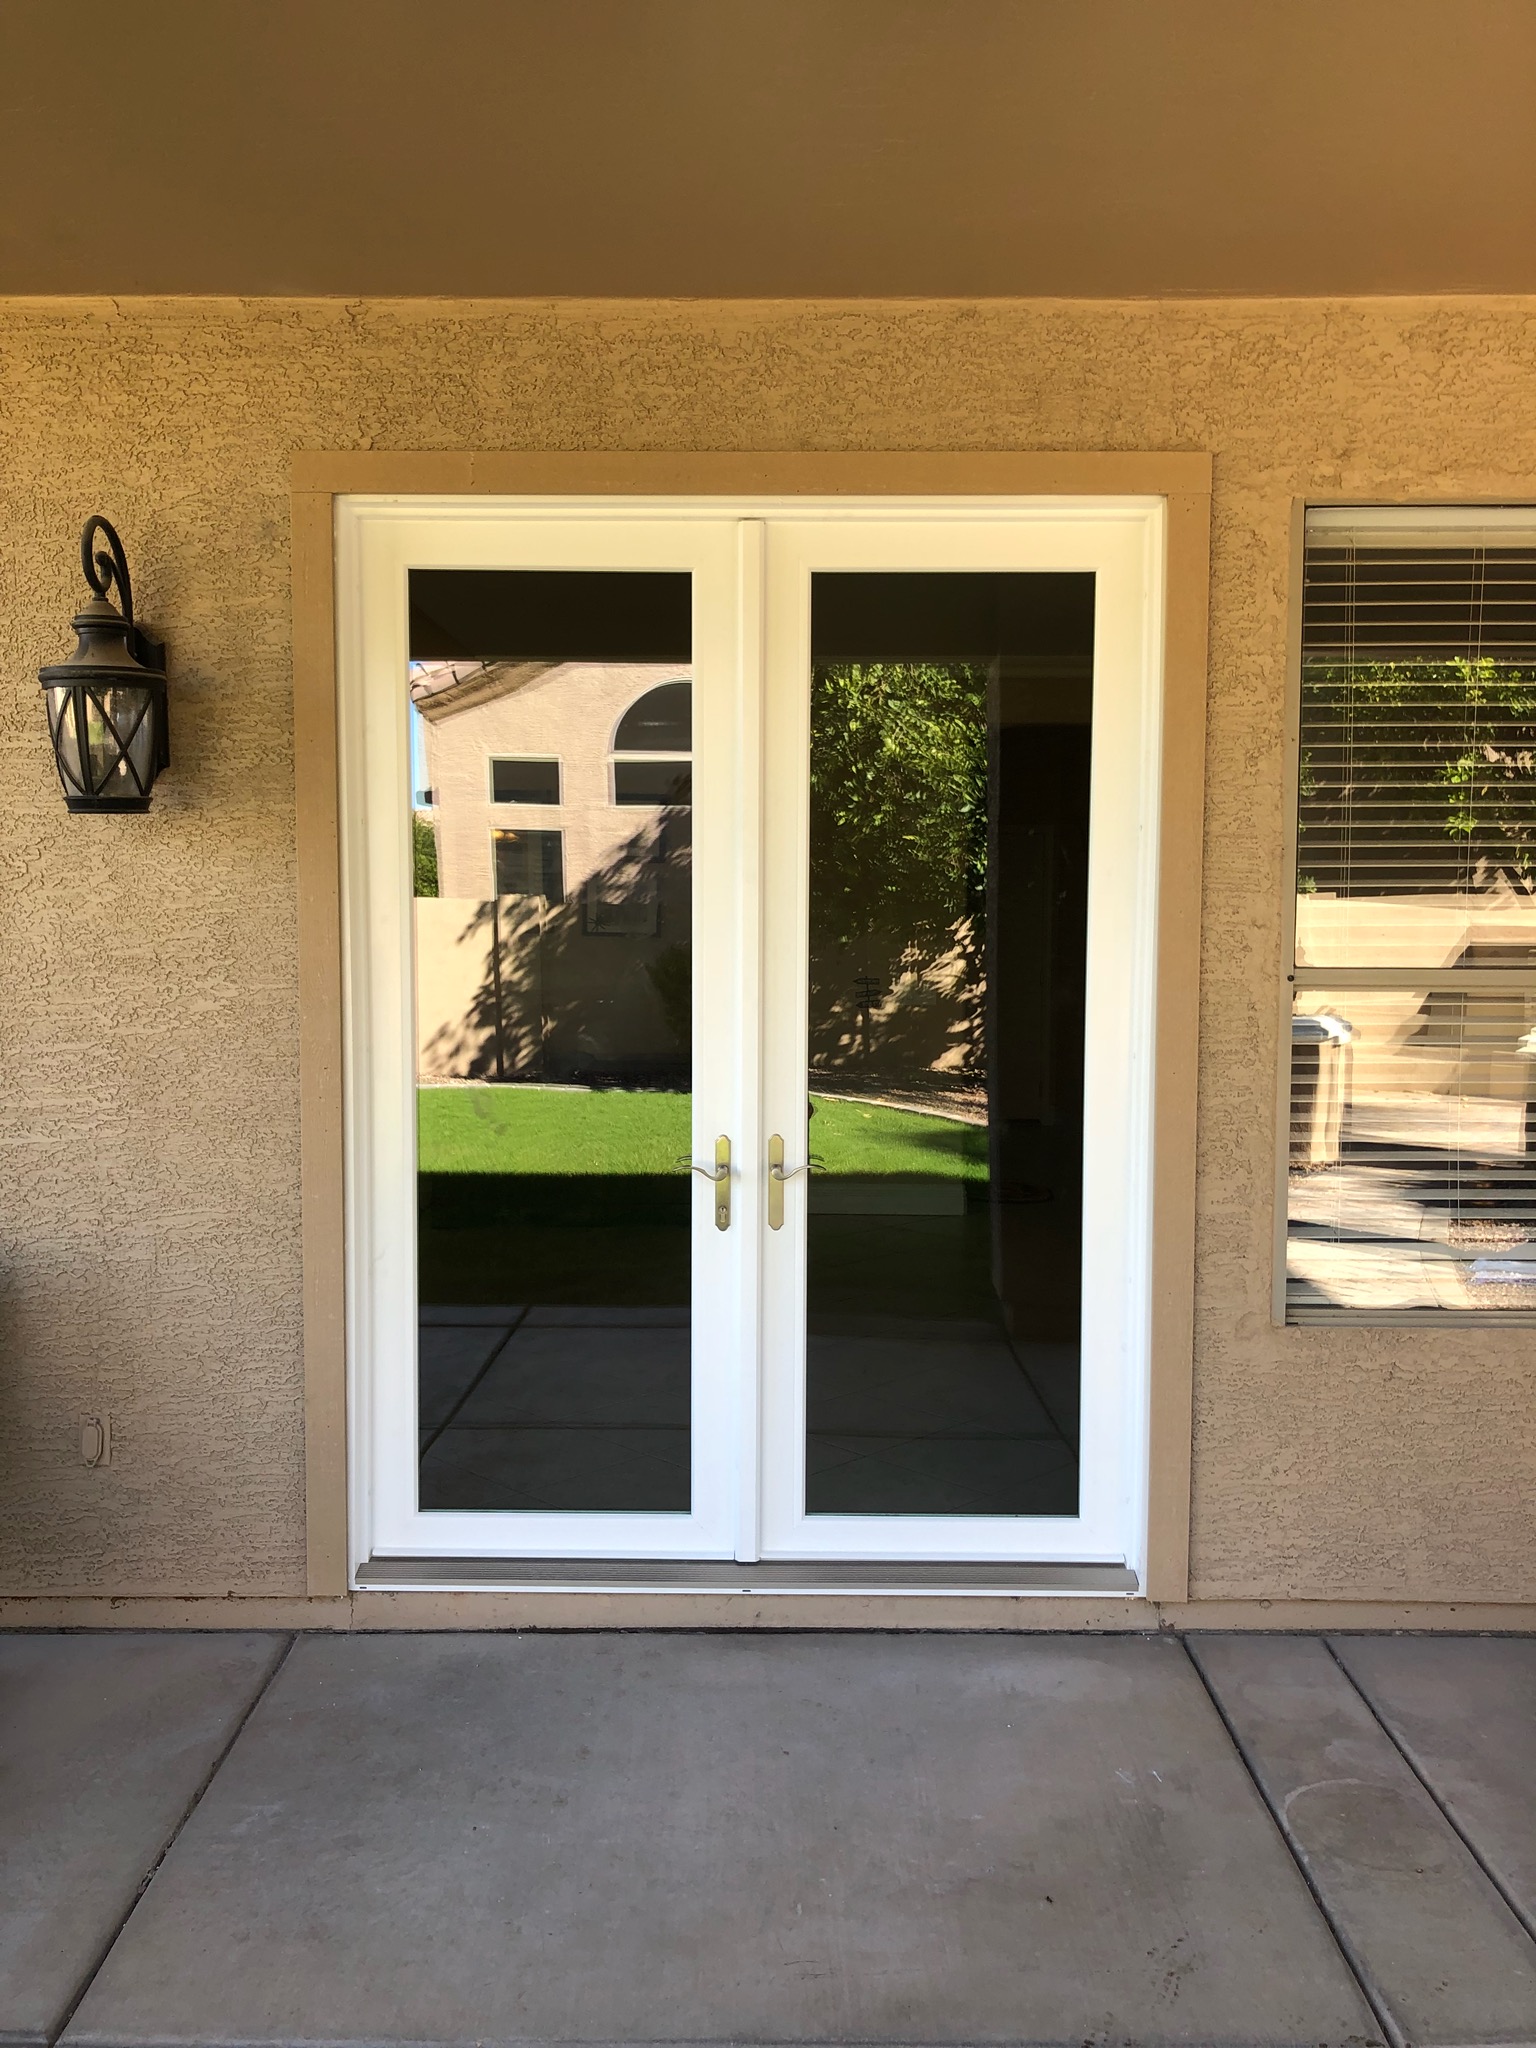 Arizona Window and Door in Scottsdale and Tucson showing french doors on patio